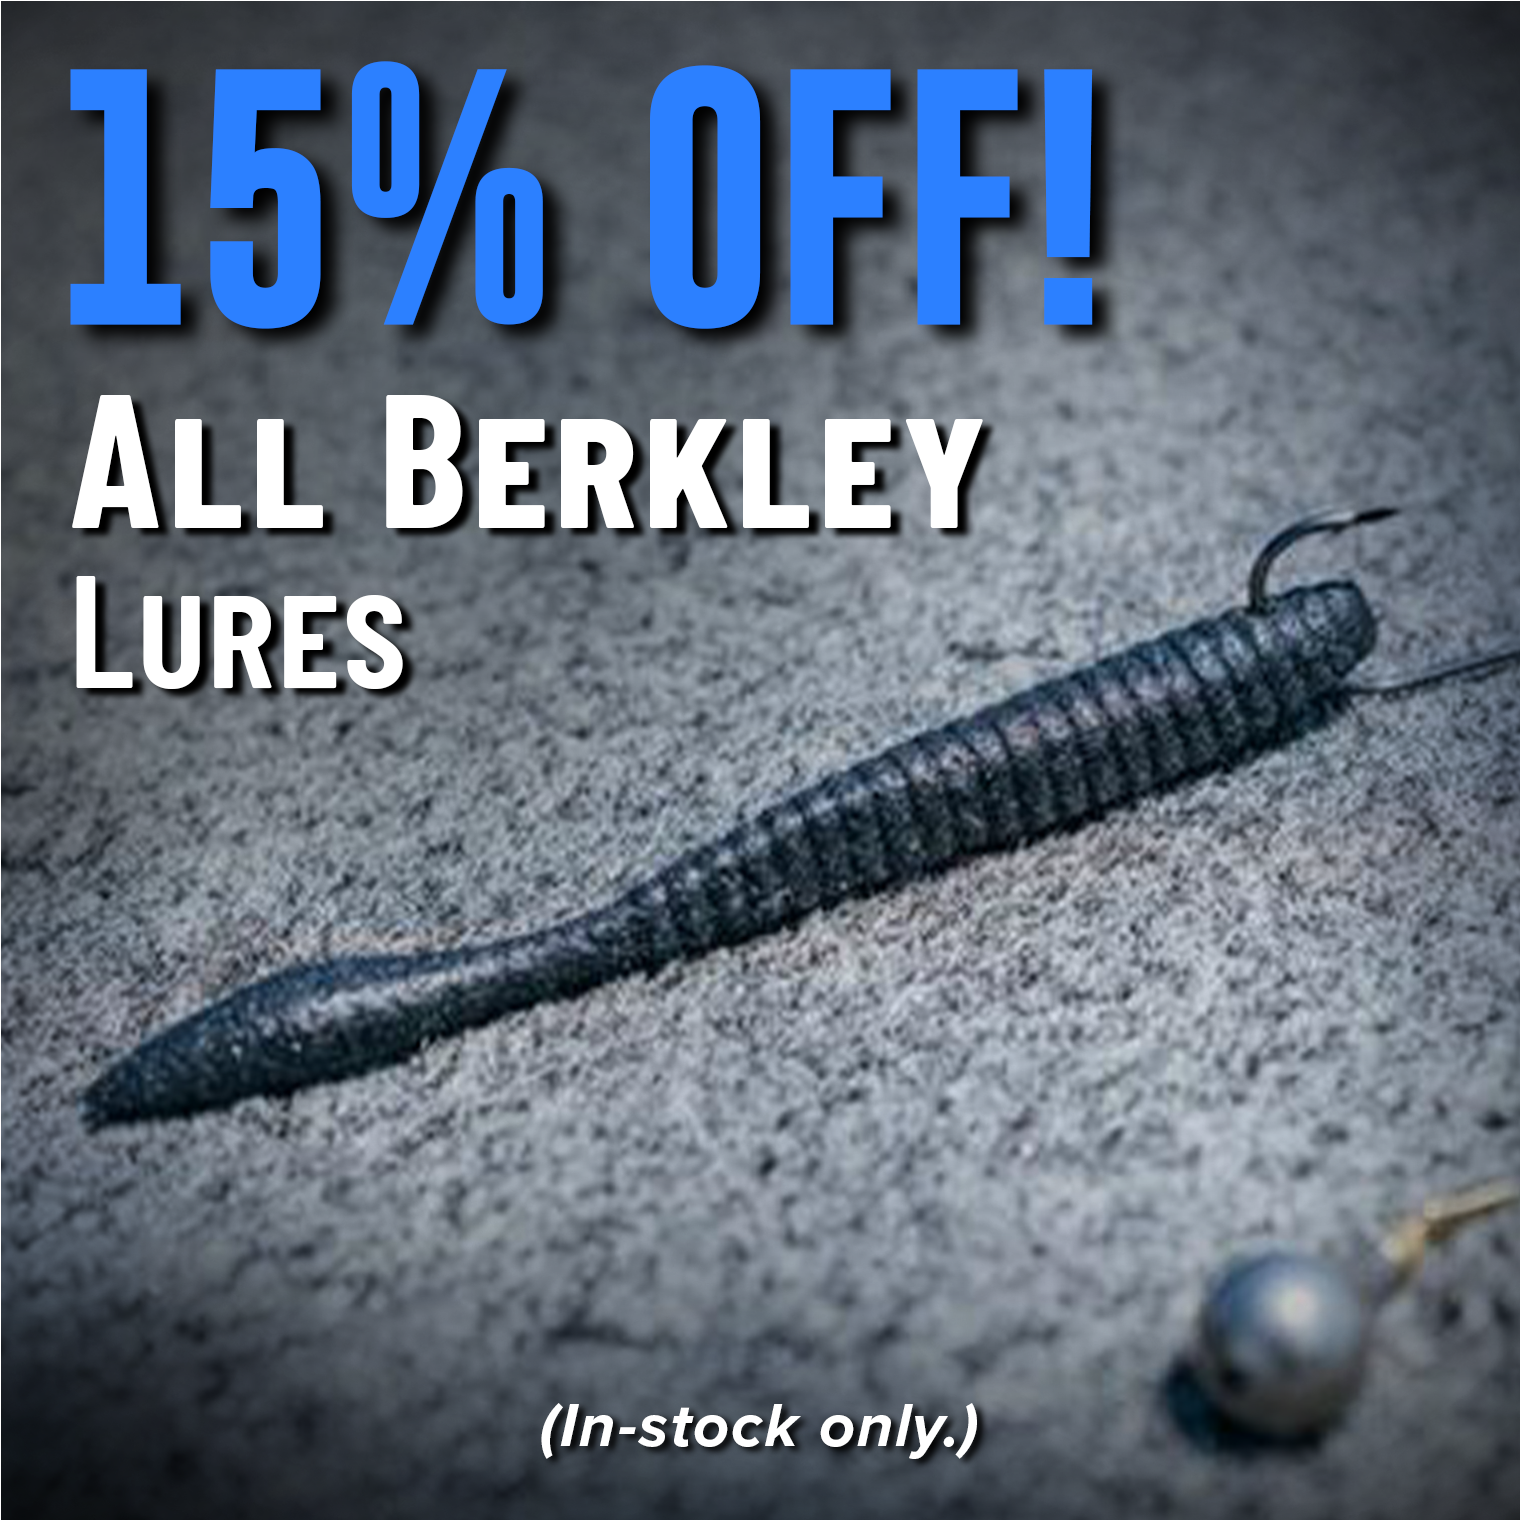 15% Off! All Berkley Lures (In-stock only.)